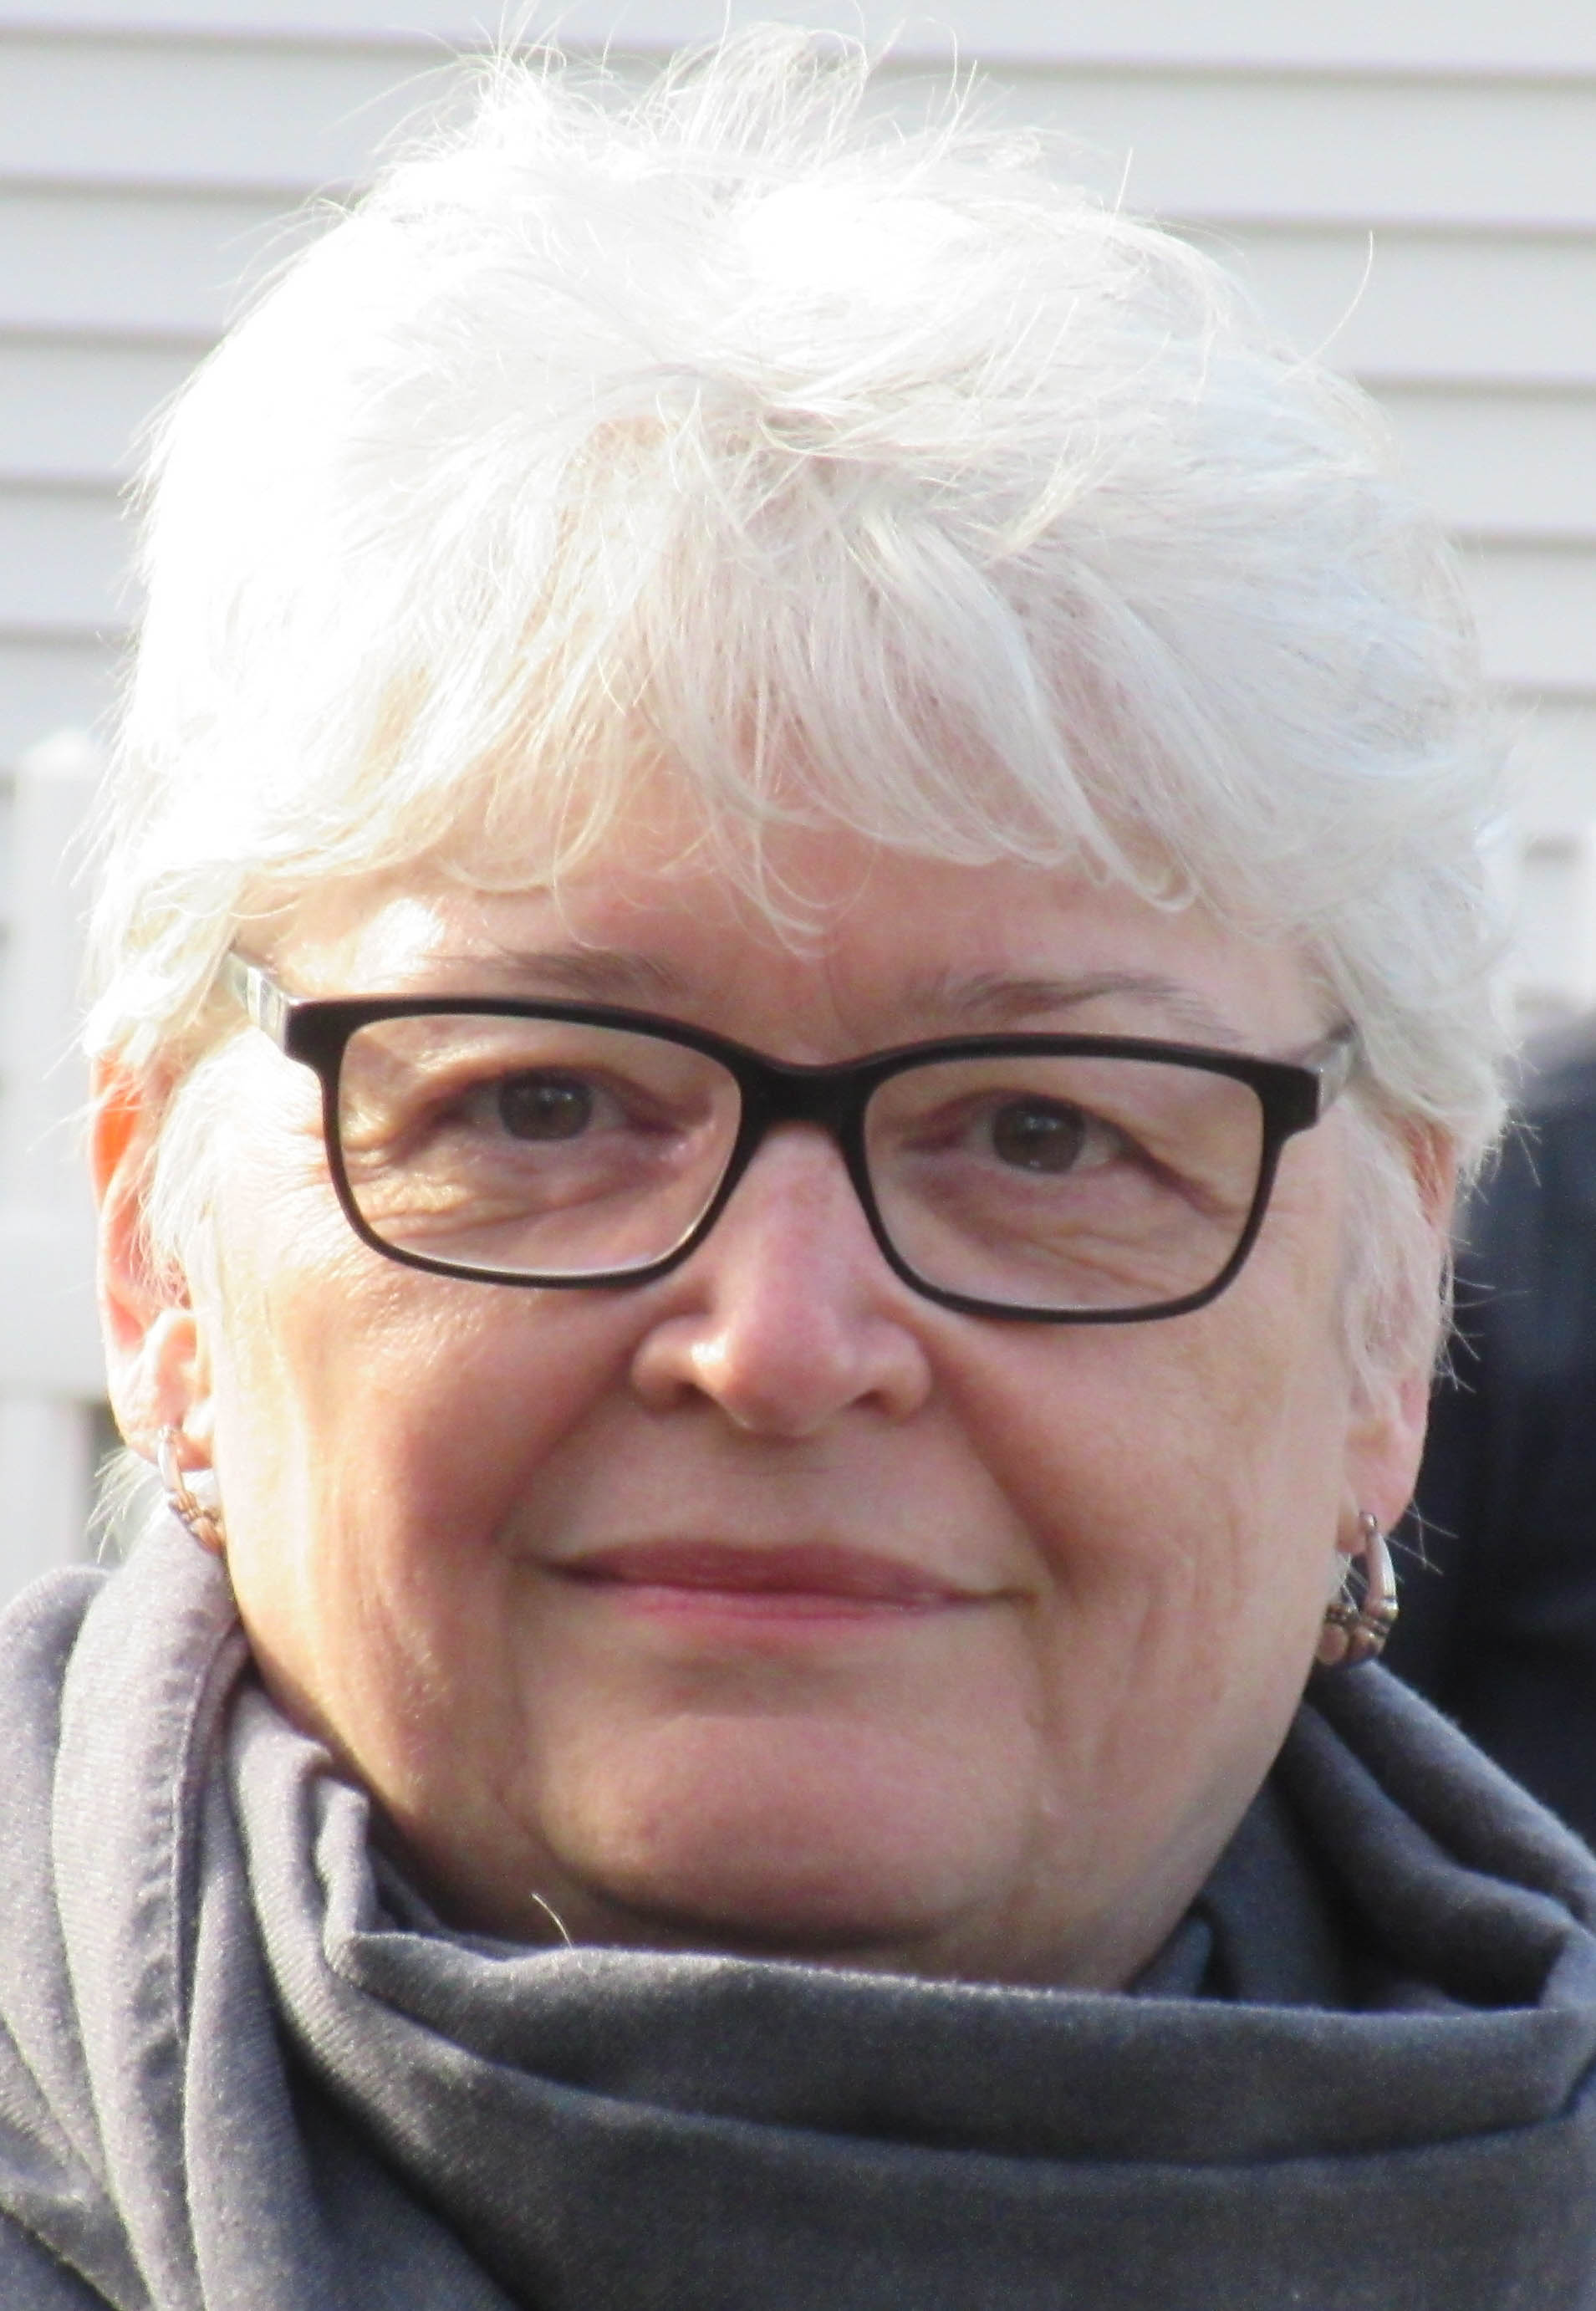 A headshot of a woman with short grey hair and glasses.